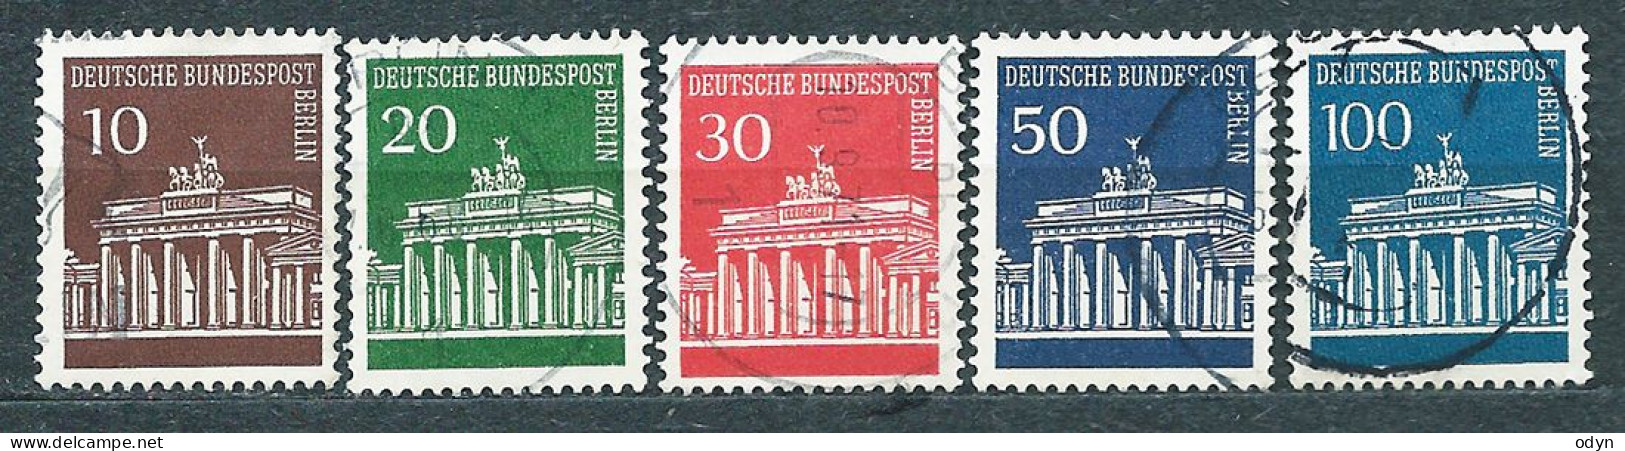 Berlin West, 1966, lot of 79 stamps from sets MiNr 270-285 + 286-290 (incl. 3 complete sets) - used